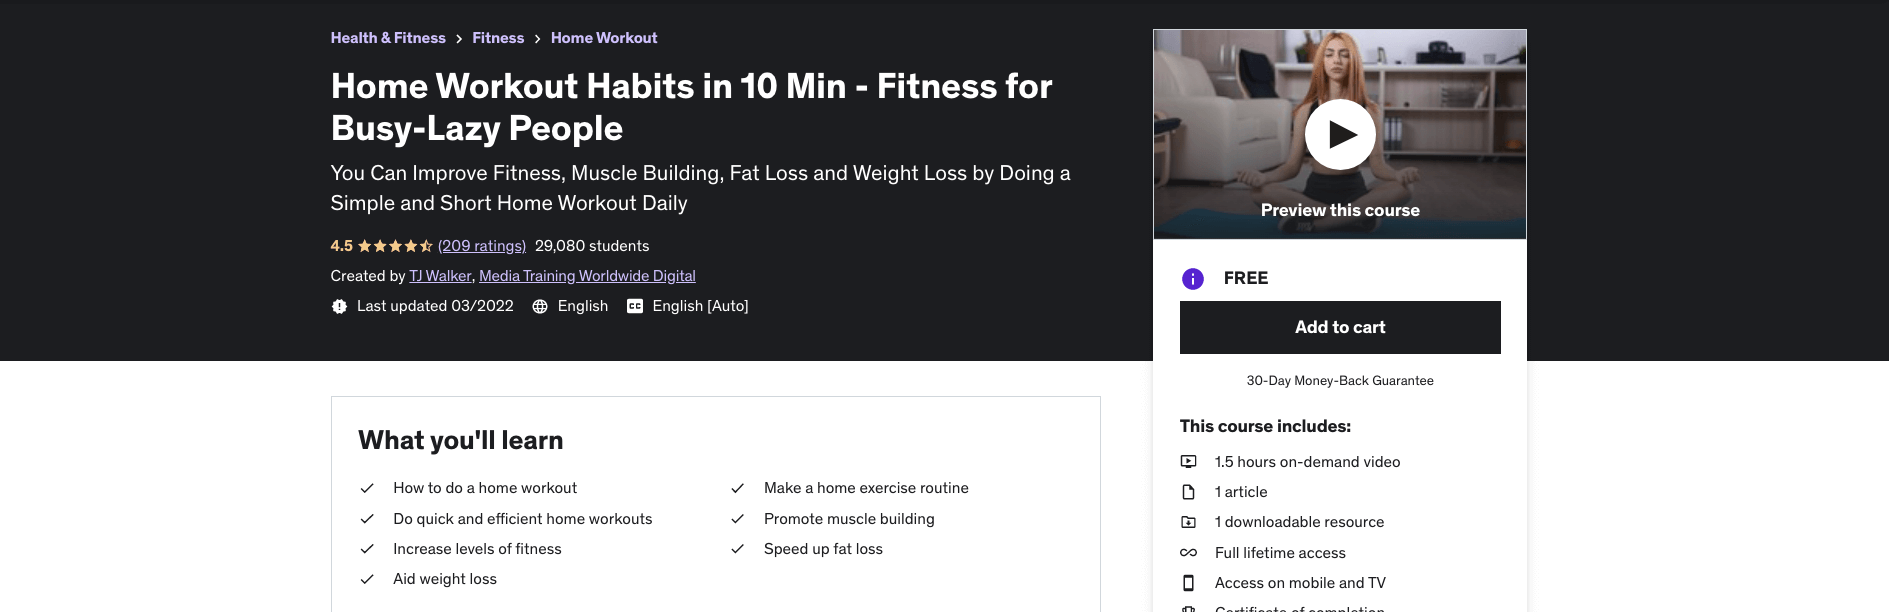 Home Workout Habits in 10 Min - Fitness for Busy-Lazy People 